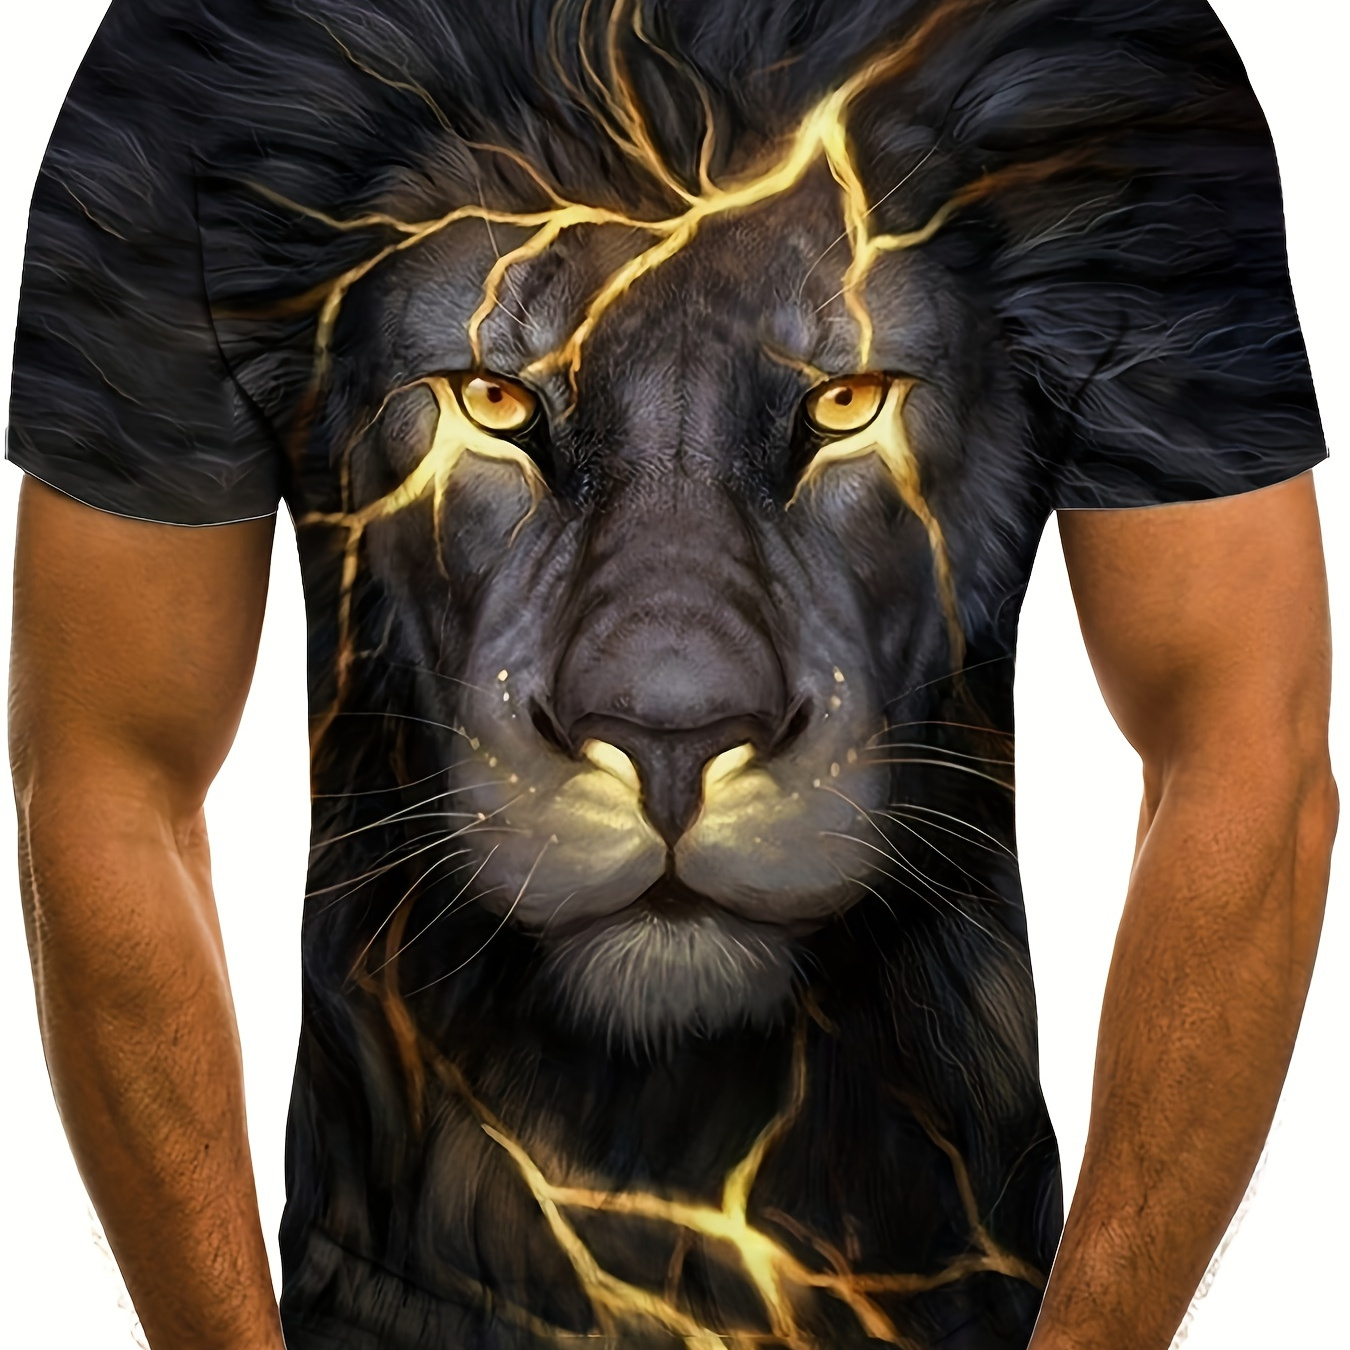 

Lion Print, Men's Graphic Design Crew Neck Active T-shirt, Casual Comfy Tees Tshirts For Summer, Men's Clothing Tops For Daily Gym Workout Running